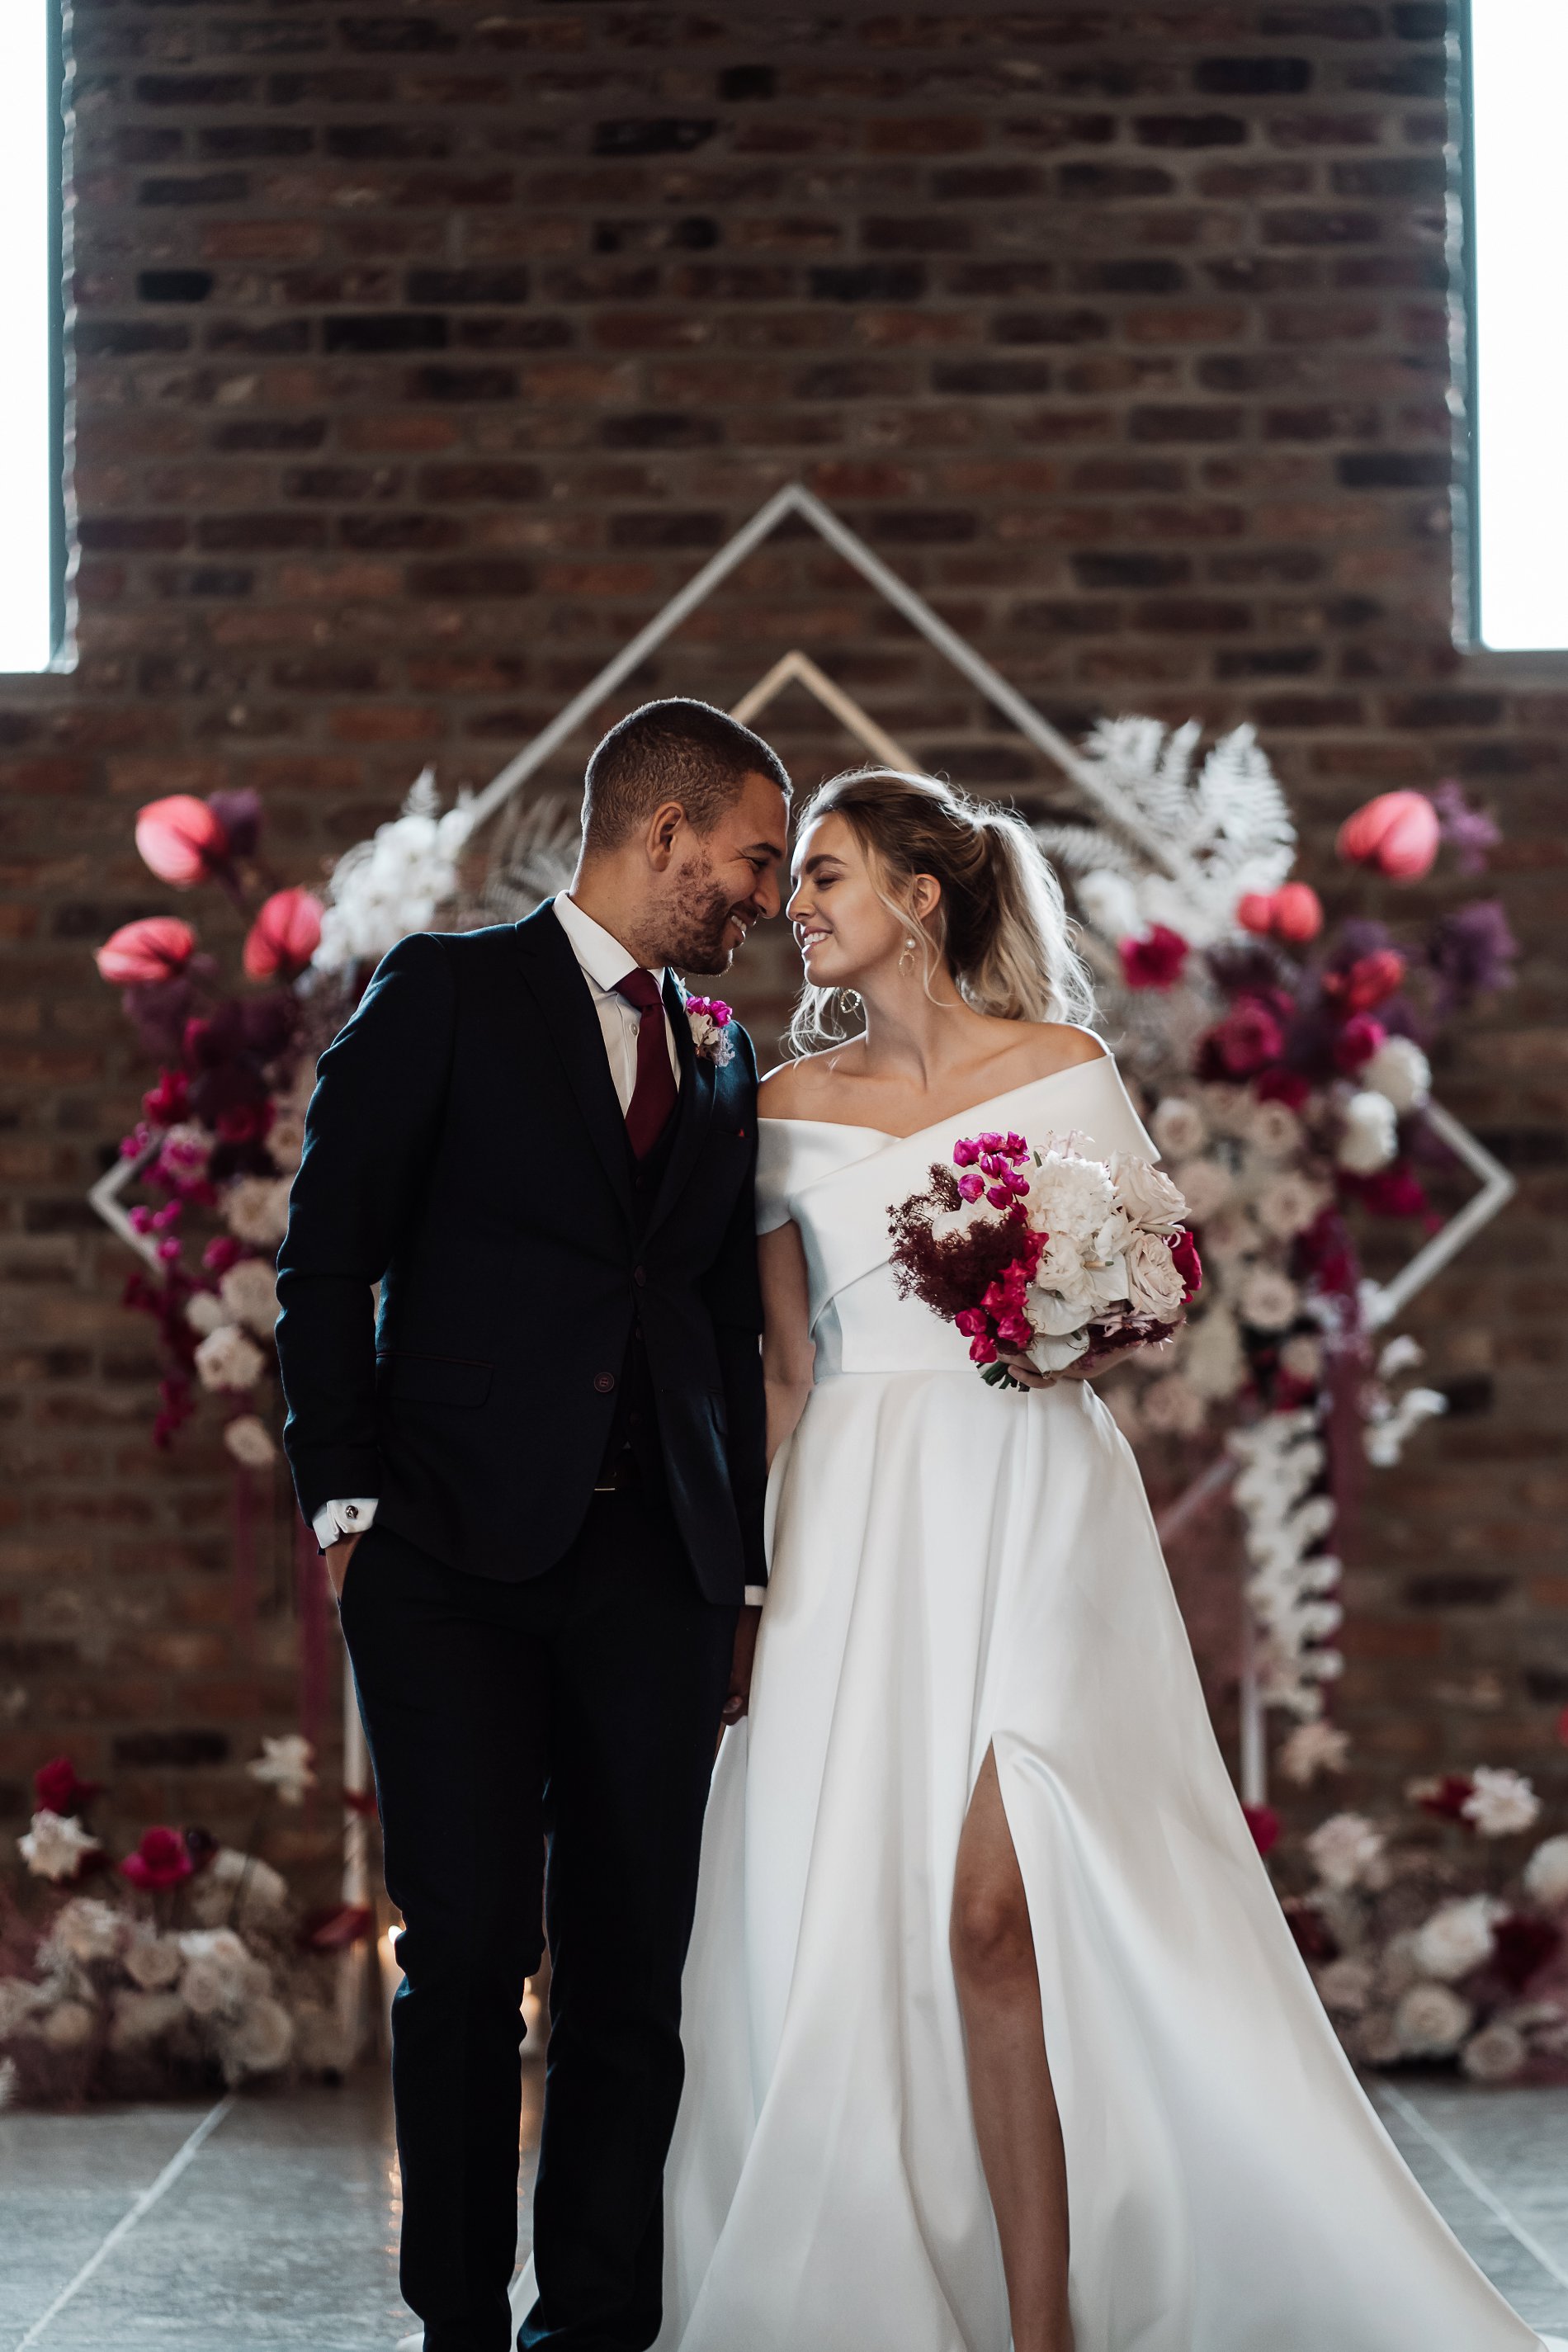 A Styled Wedding Shoot at The Oakwood at Ryther (c) Emma Ryan Photography (16)